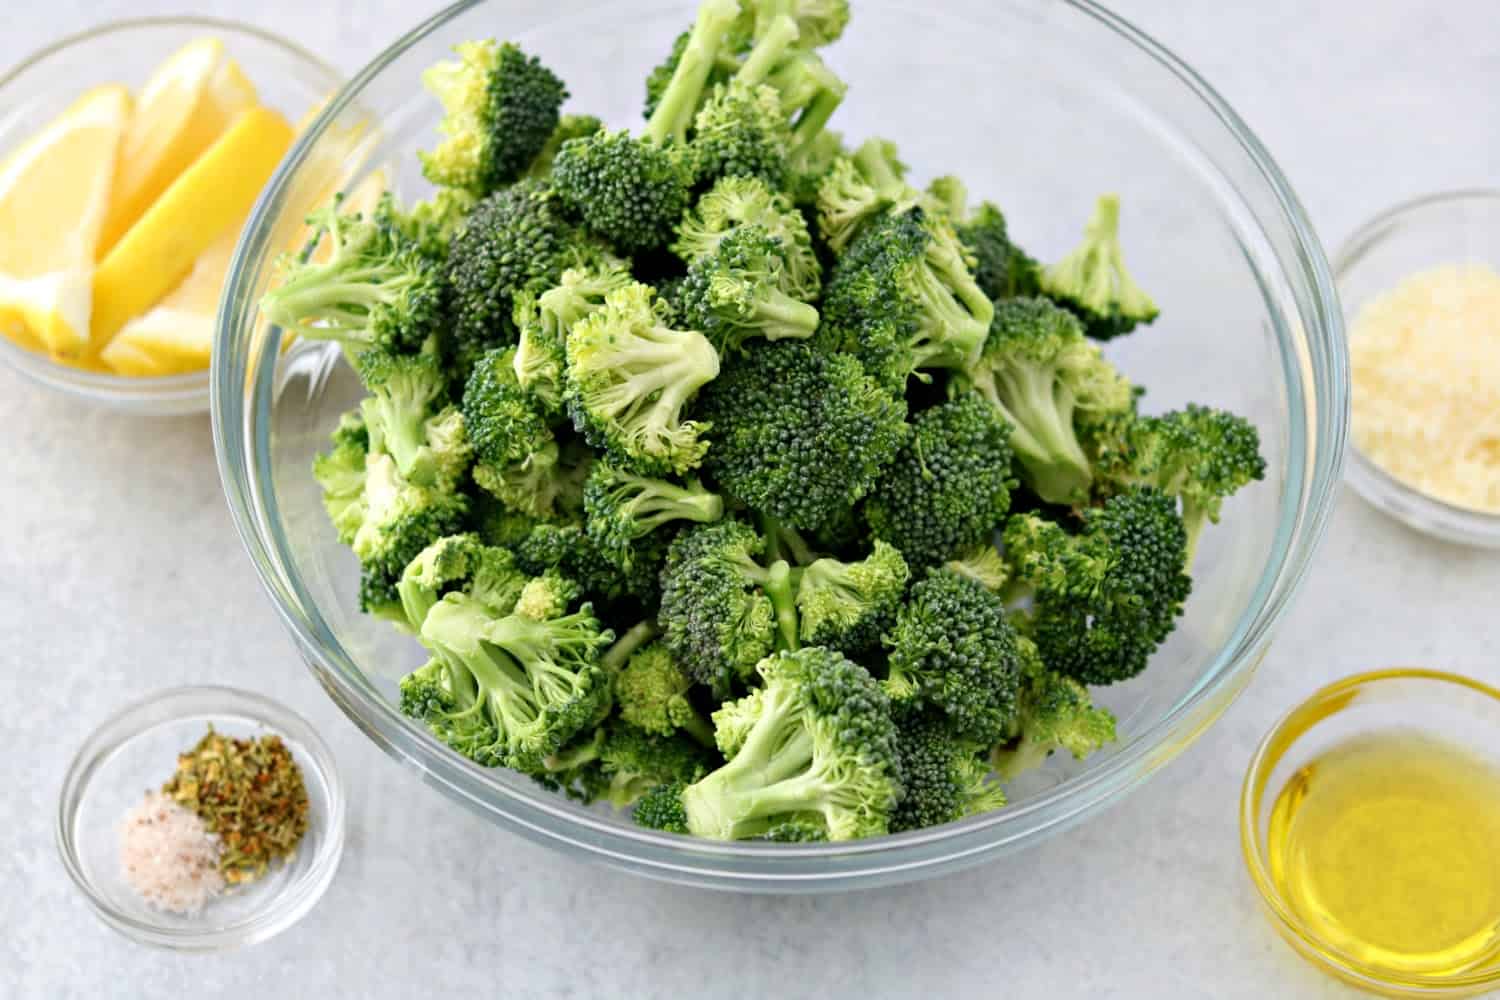 One bowl of broccoli with olive oil, lemon, parmesan and seasonings